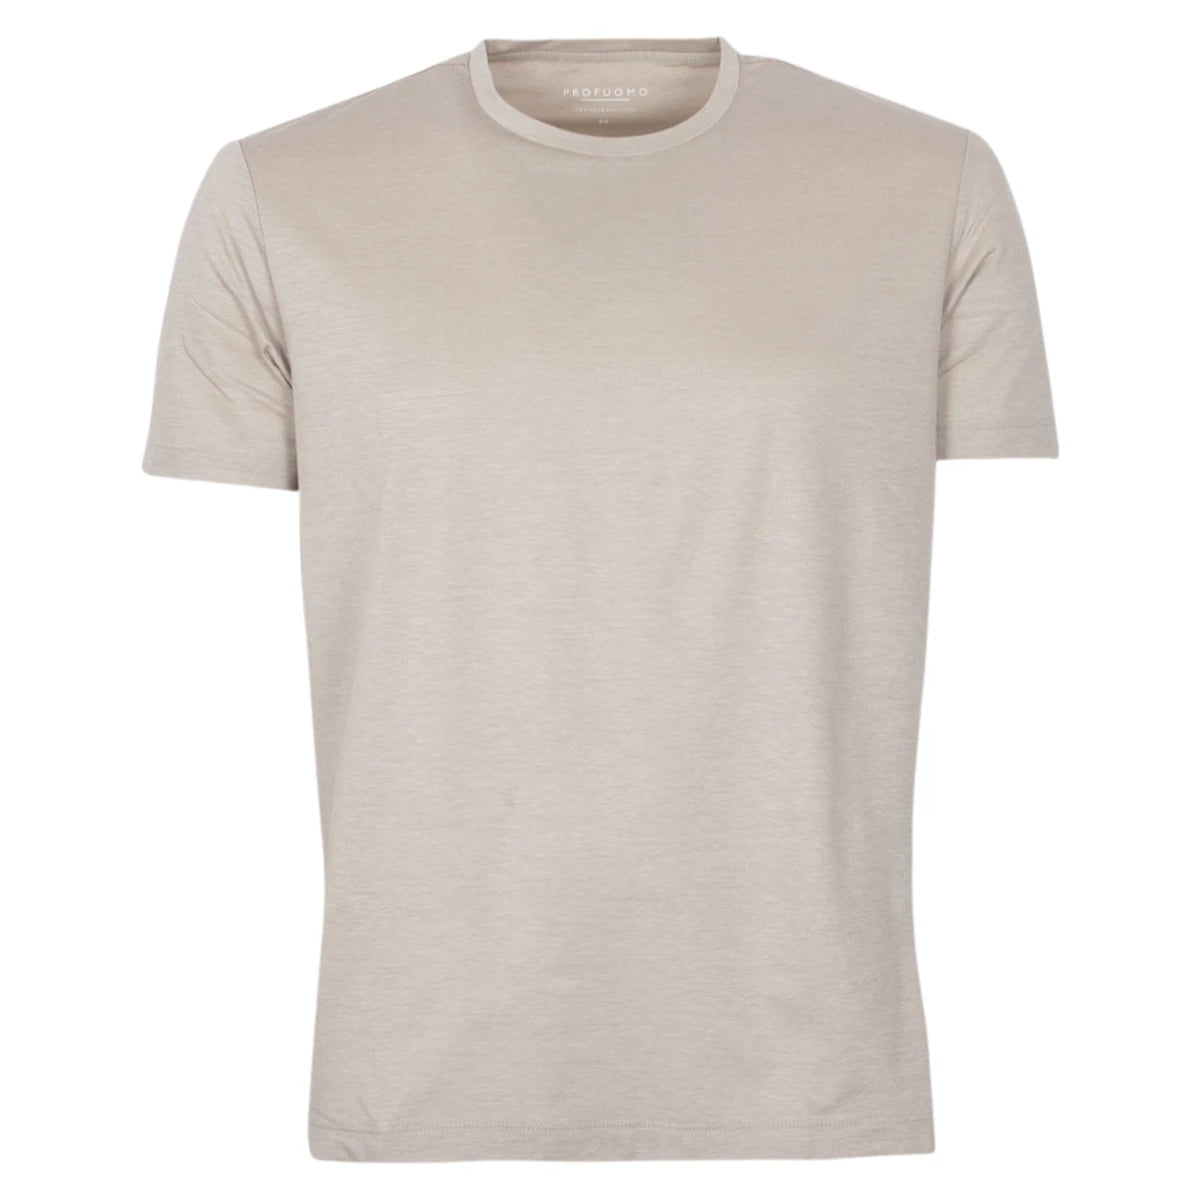 Profuomo T-shirt beige | Japanese knitted